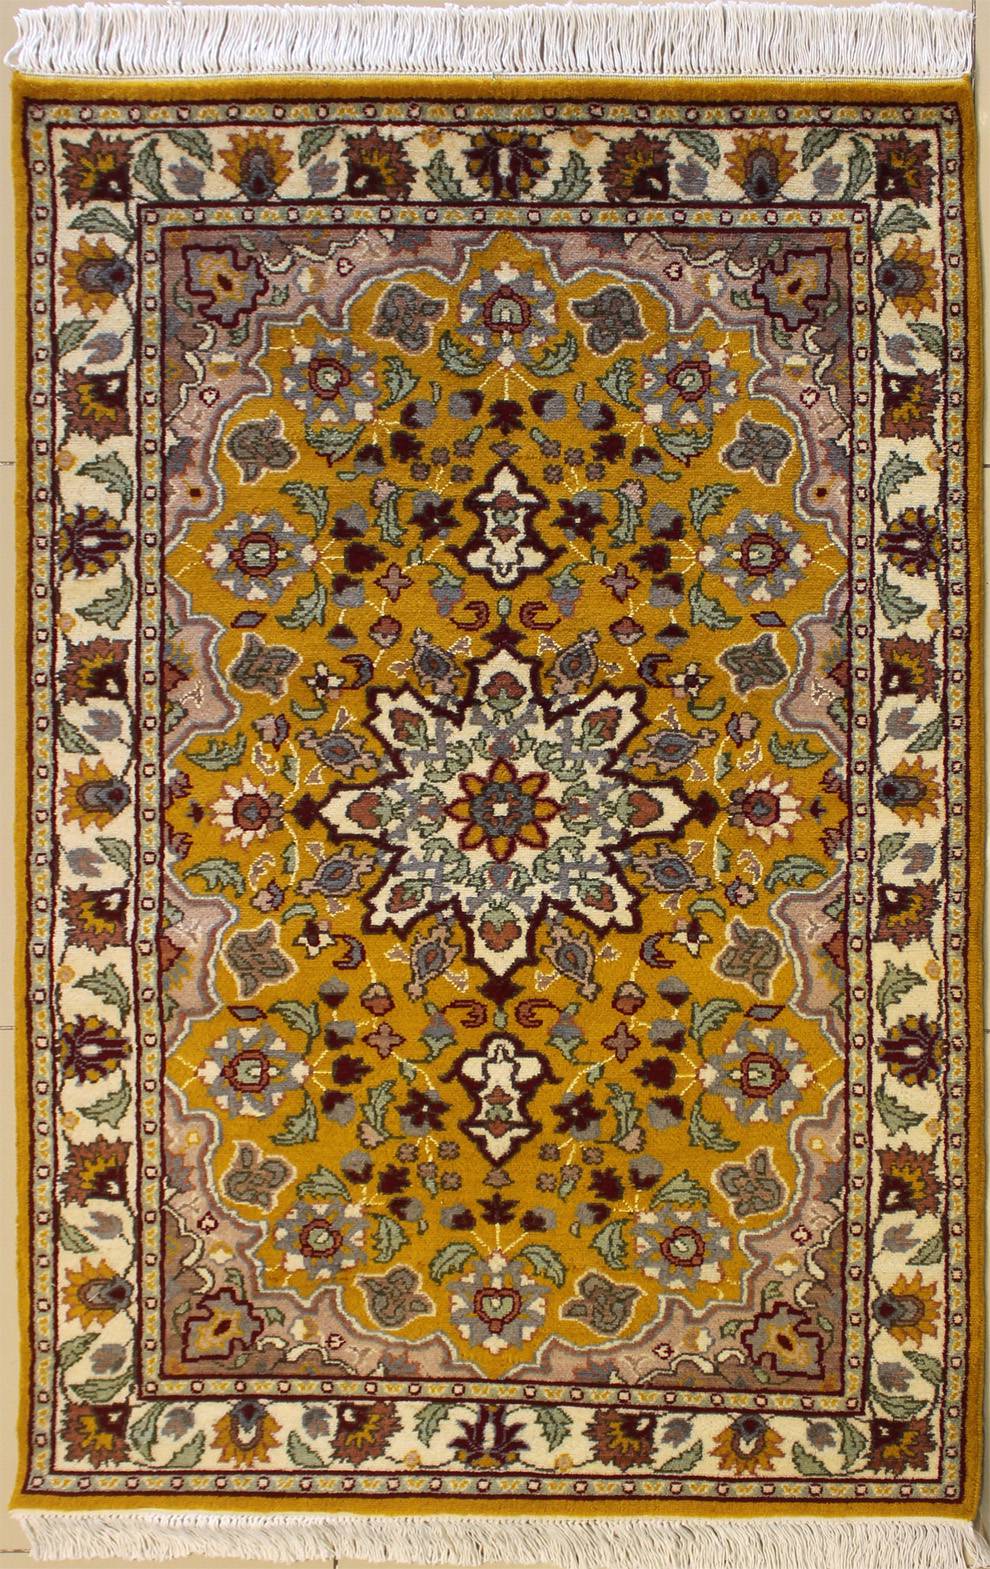 100% Original Hand-Knotted in Black,White,Beige Colors Floral Design a 7x10 Rectangular Double Knot Rug RugsTC 7'0 x 10'10 Pak Persian Area Rug with Silk & Wool Pile 